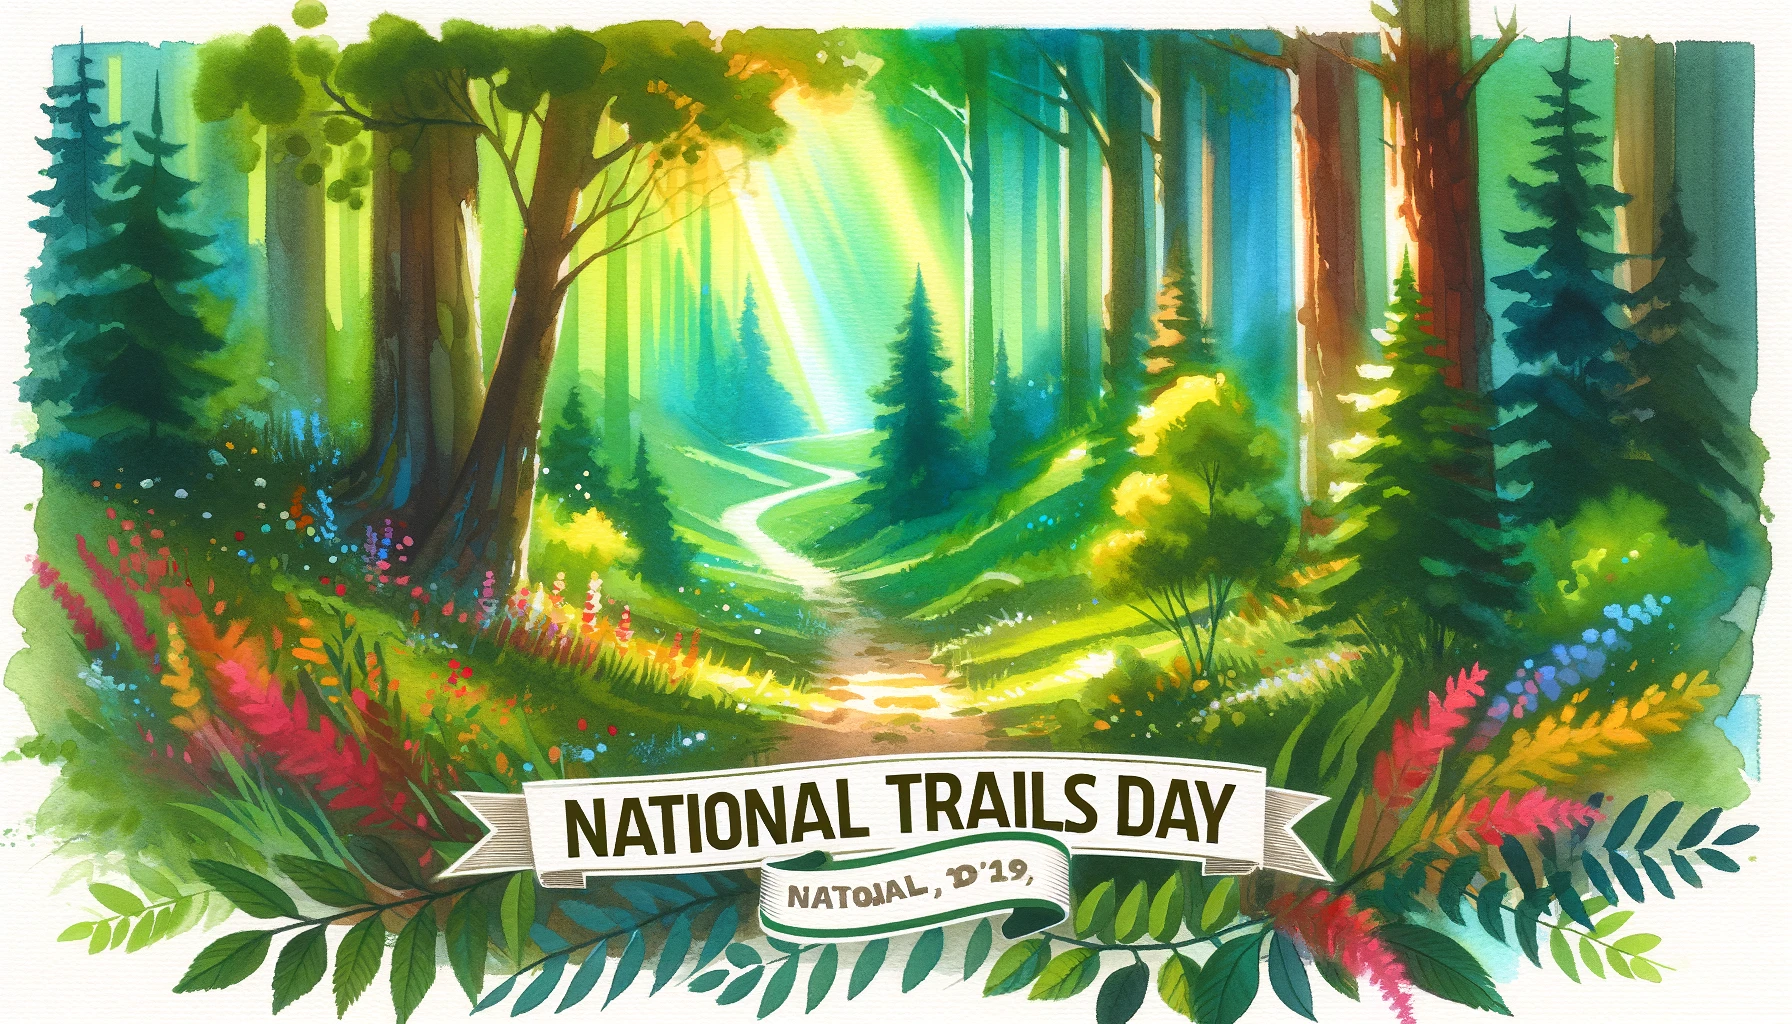 Inspiring National Trails Day Messages for Outdoor Enthusiasts